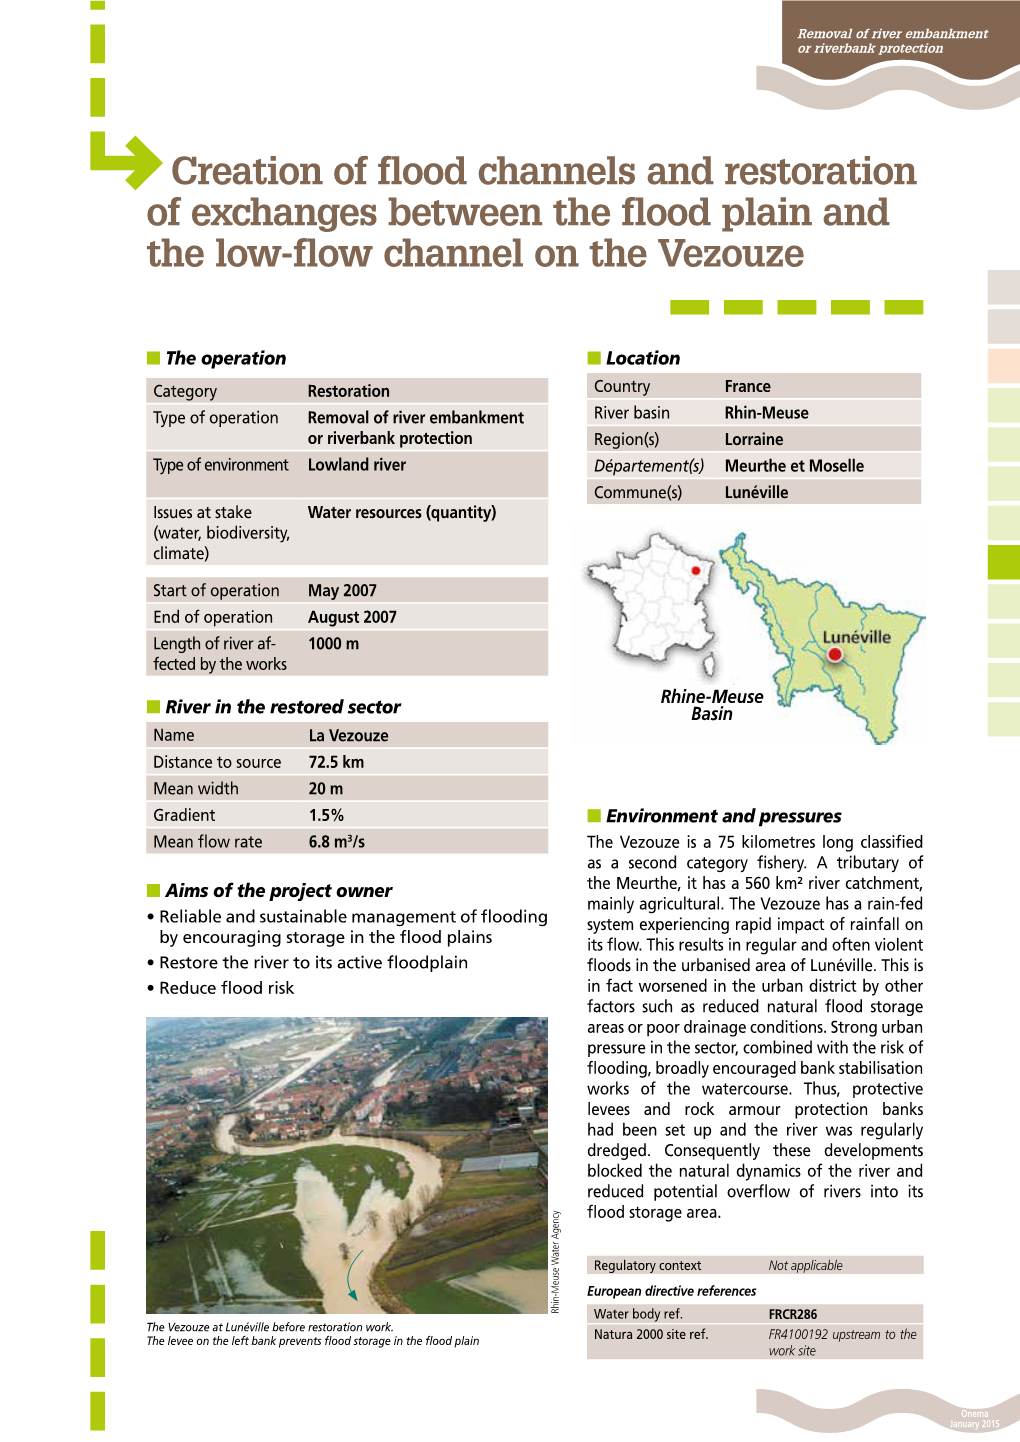 Creation of Flood Channels and Restoration of Exchanges Between the Flood Plain and the Low-Flow Channel on the Vezouze